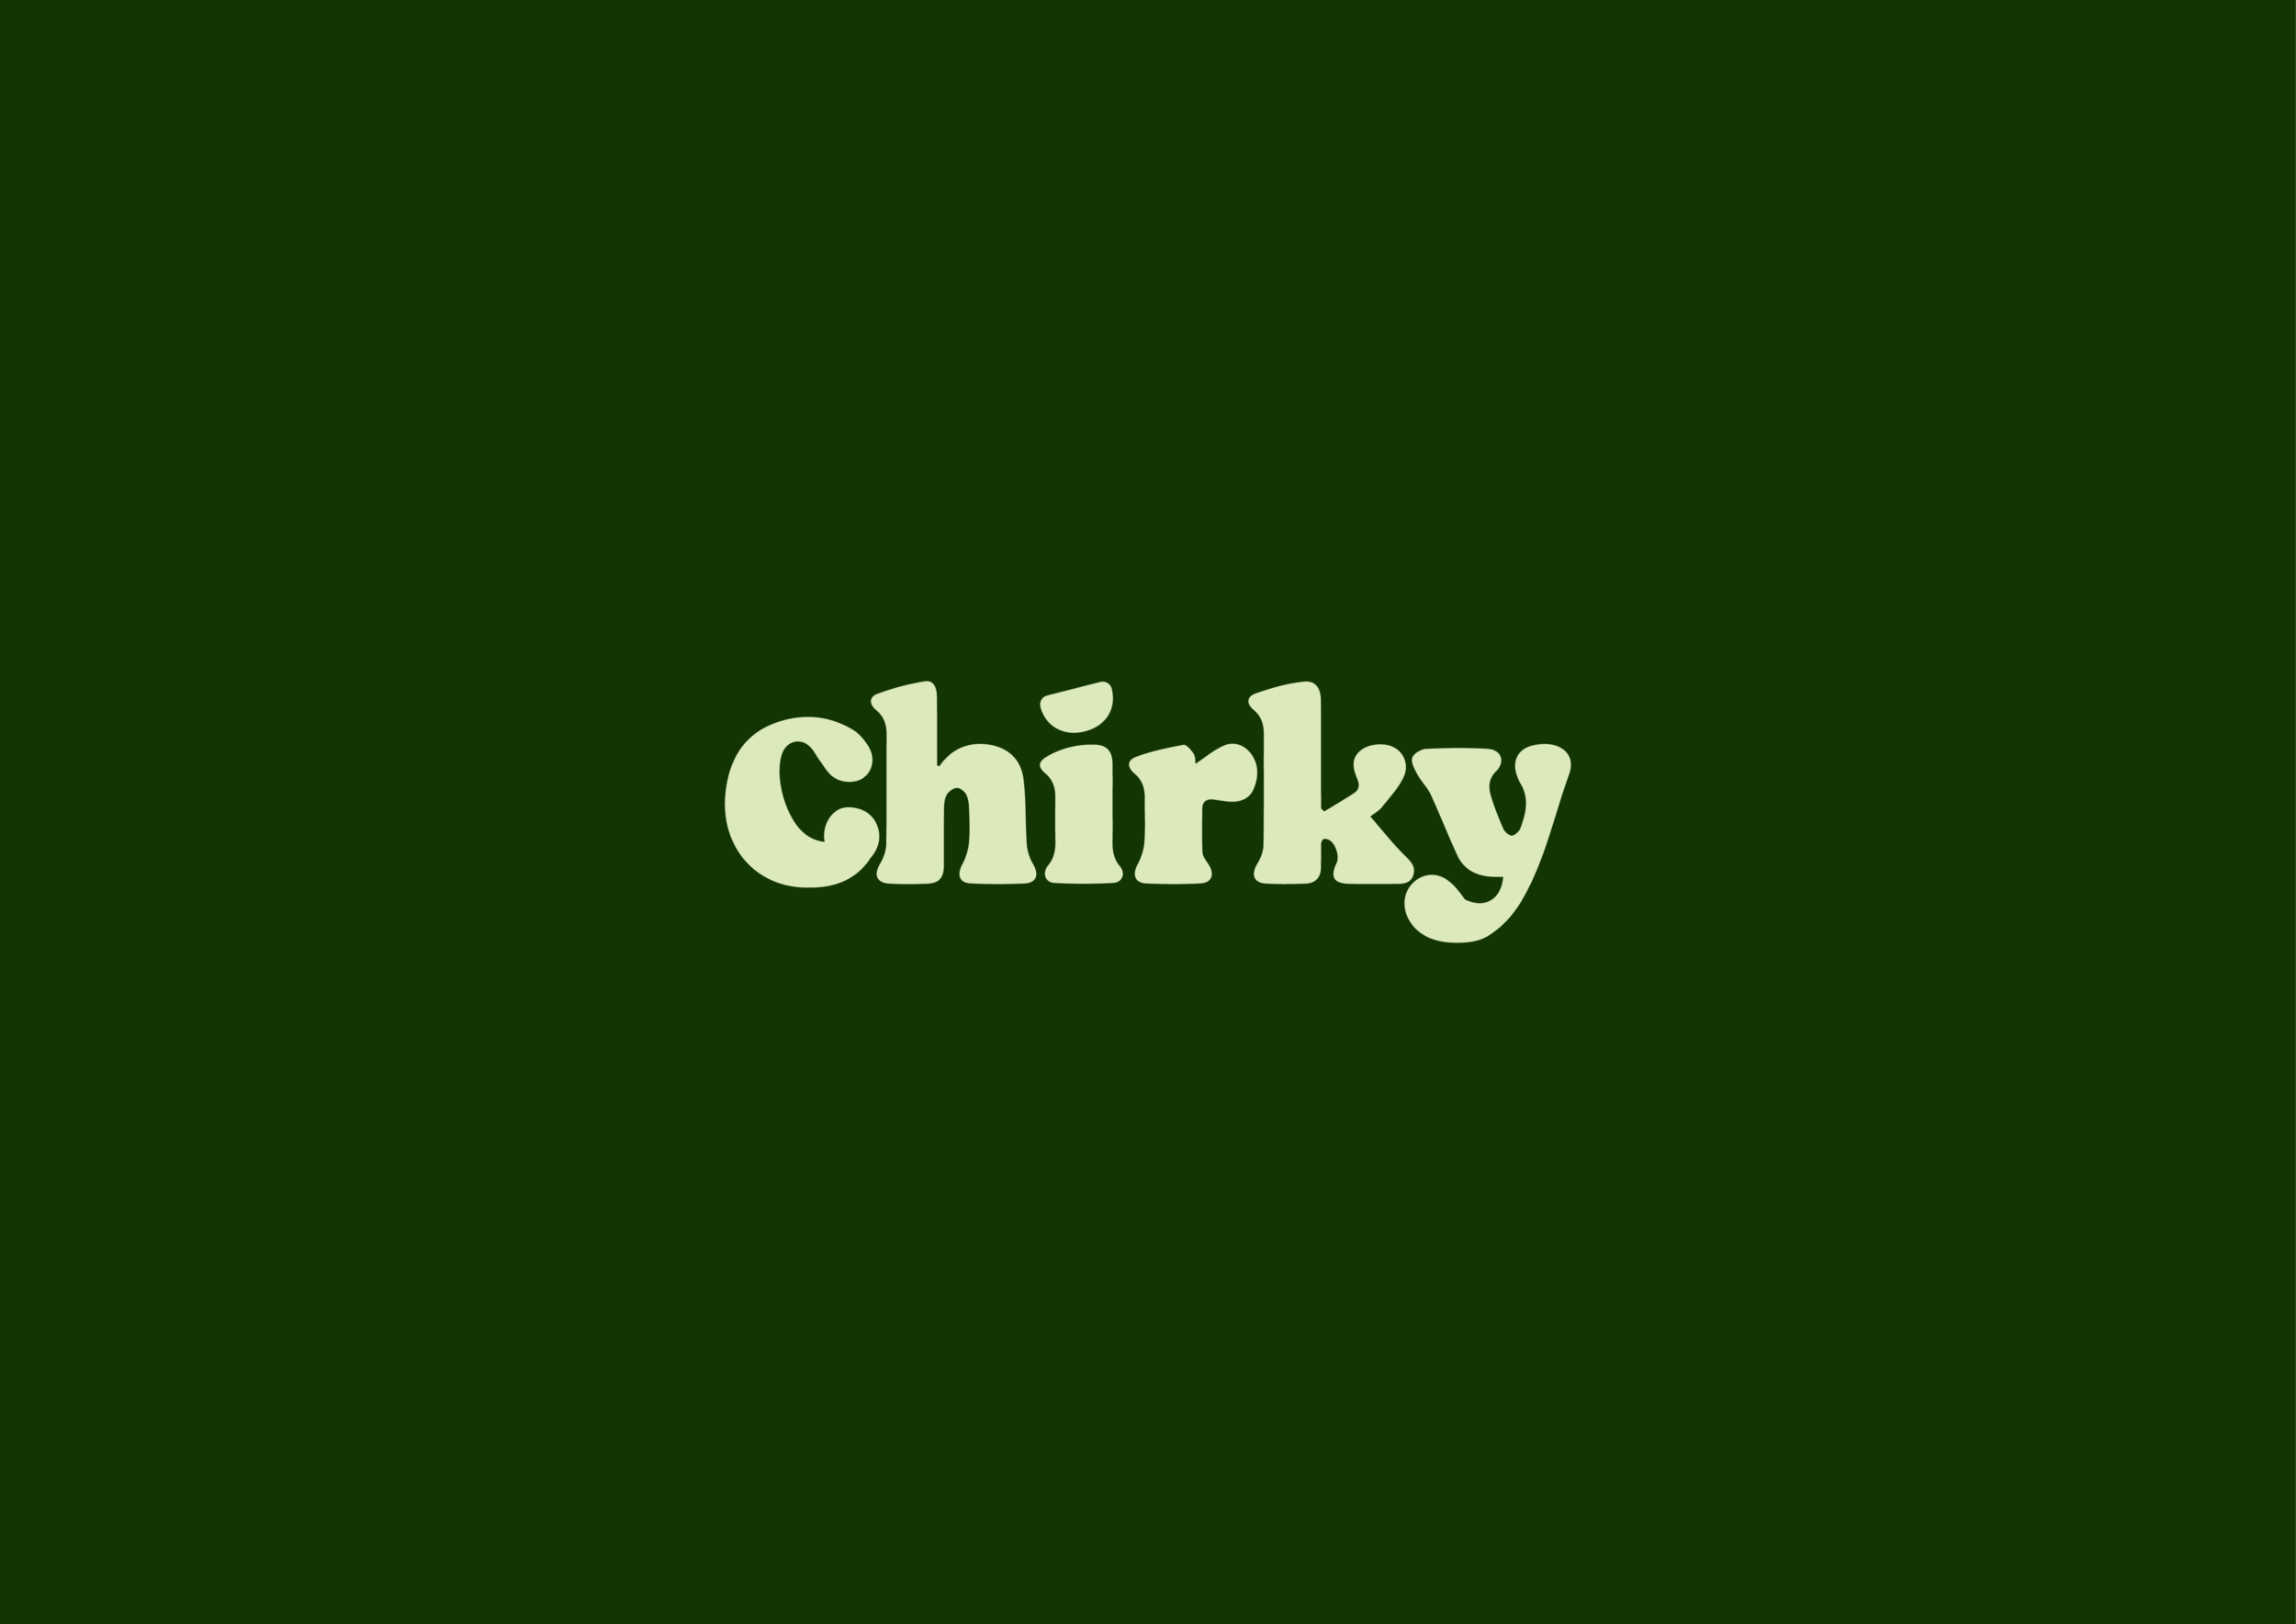 Freelance-graphic-designer-Chirky company font logo with dark green background